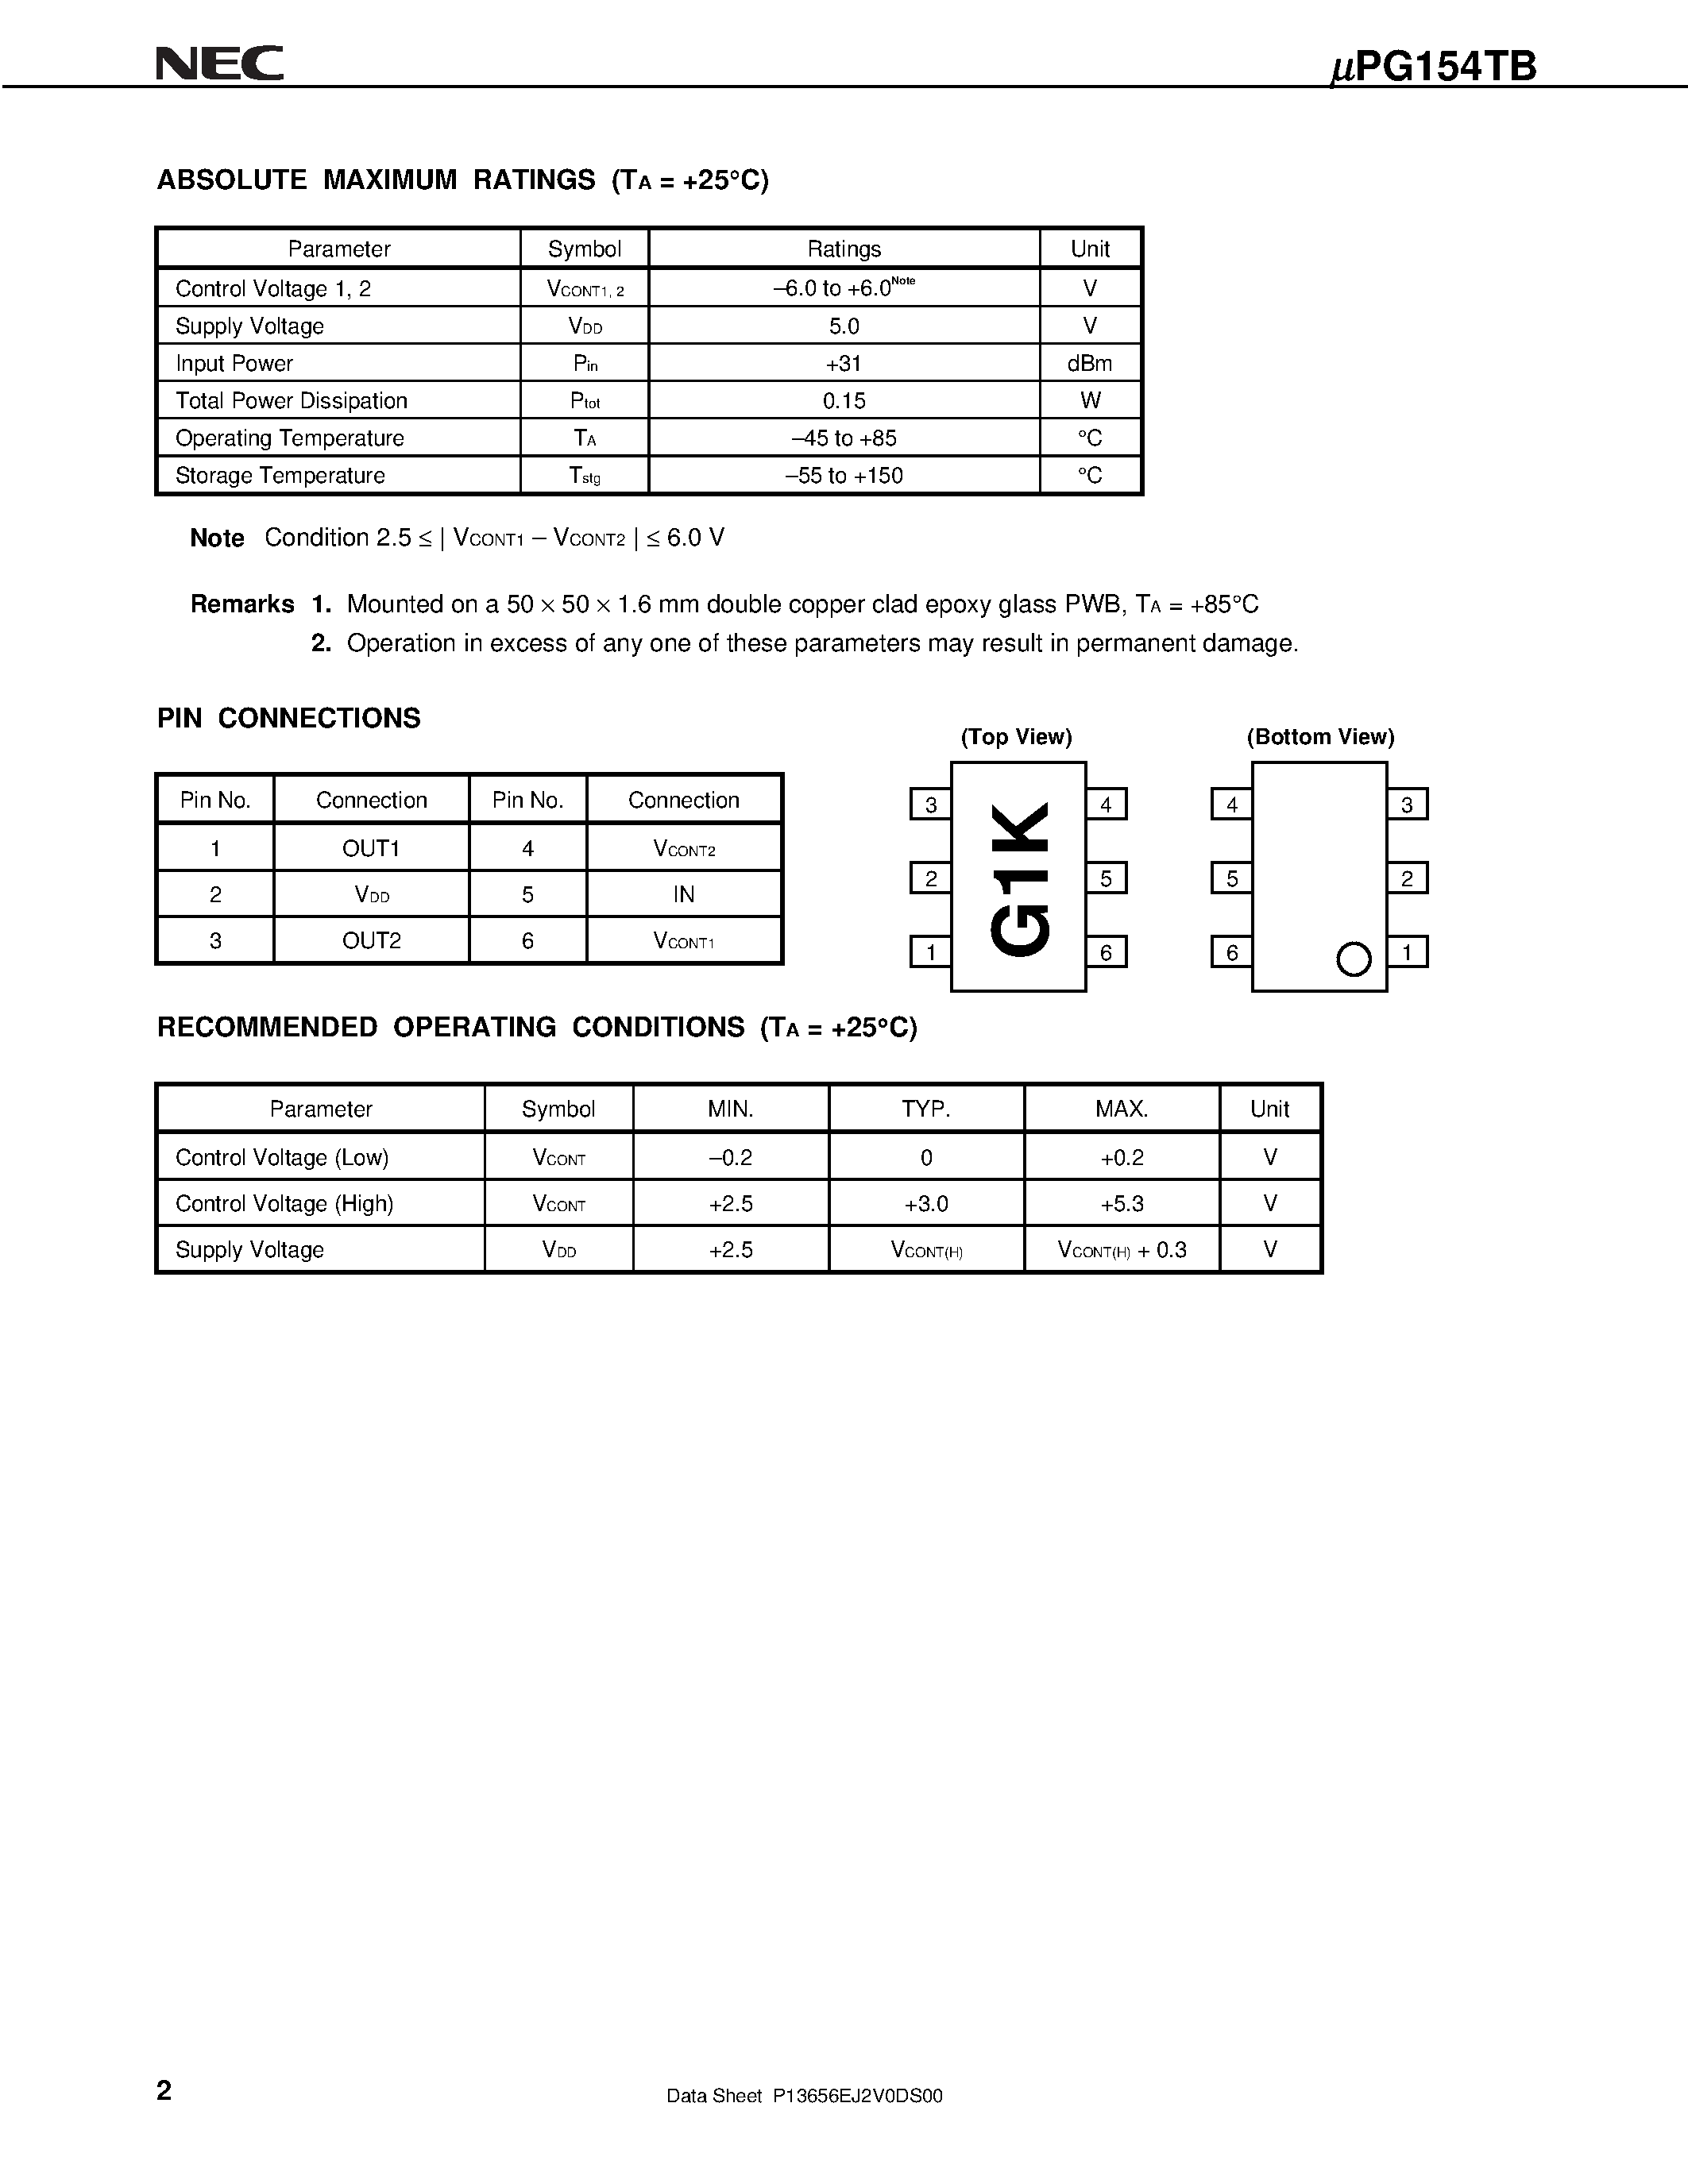 Datasheet UPG154TB - L-BAND SPDT SWITCH page 2